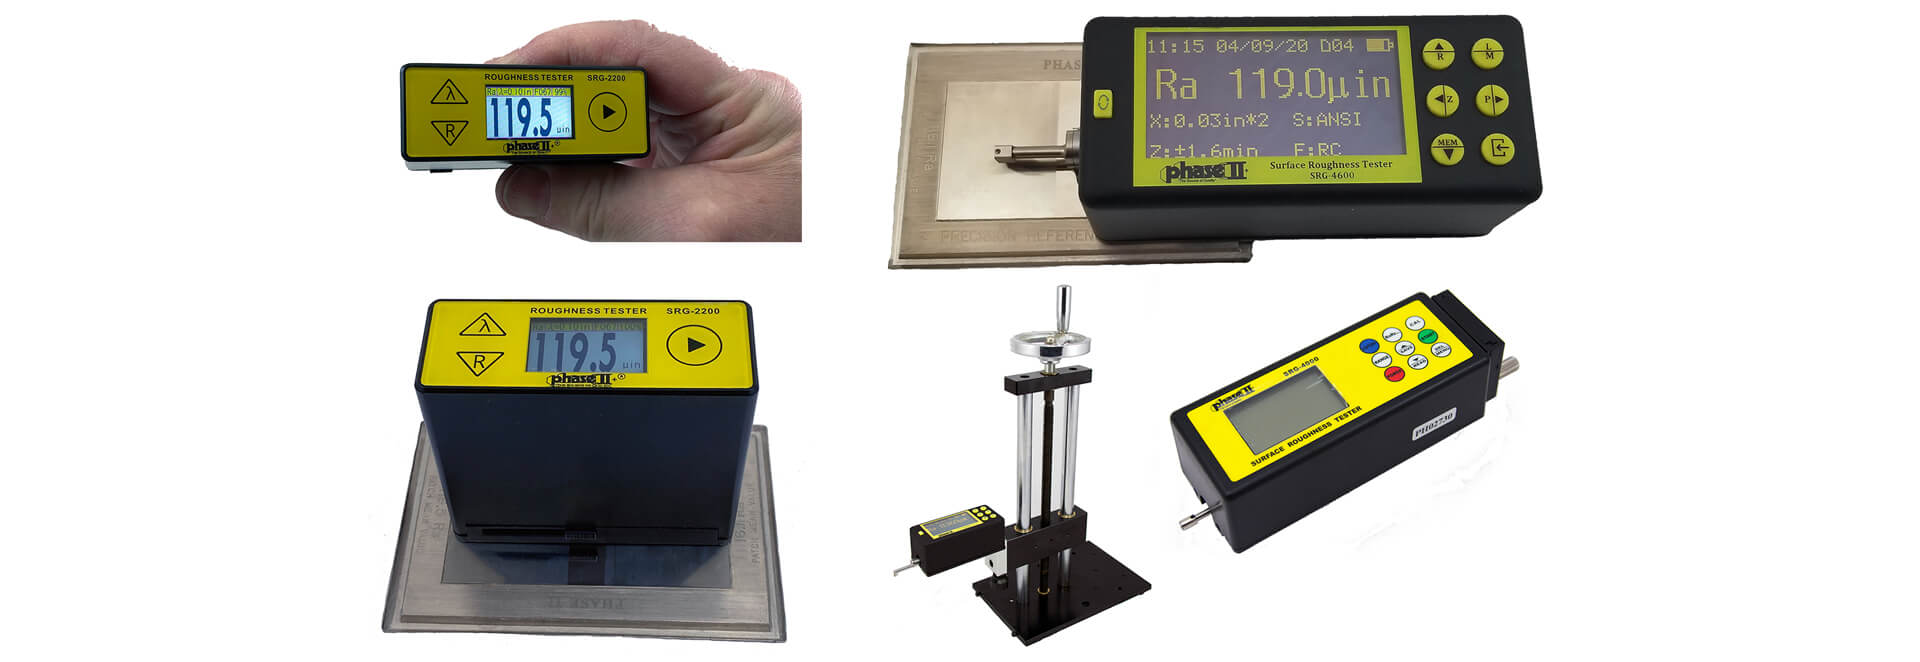 surface roughness testers, profilometers, surface roughness, Ra surface roughness, surface roughness measurement, surface roughness parameters, surface roughness gauge, surface roughness meter